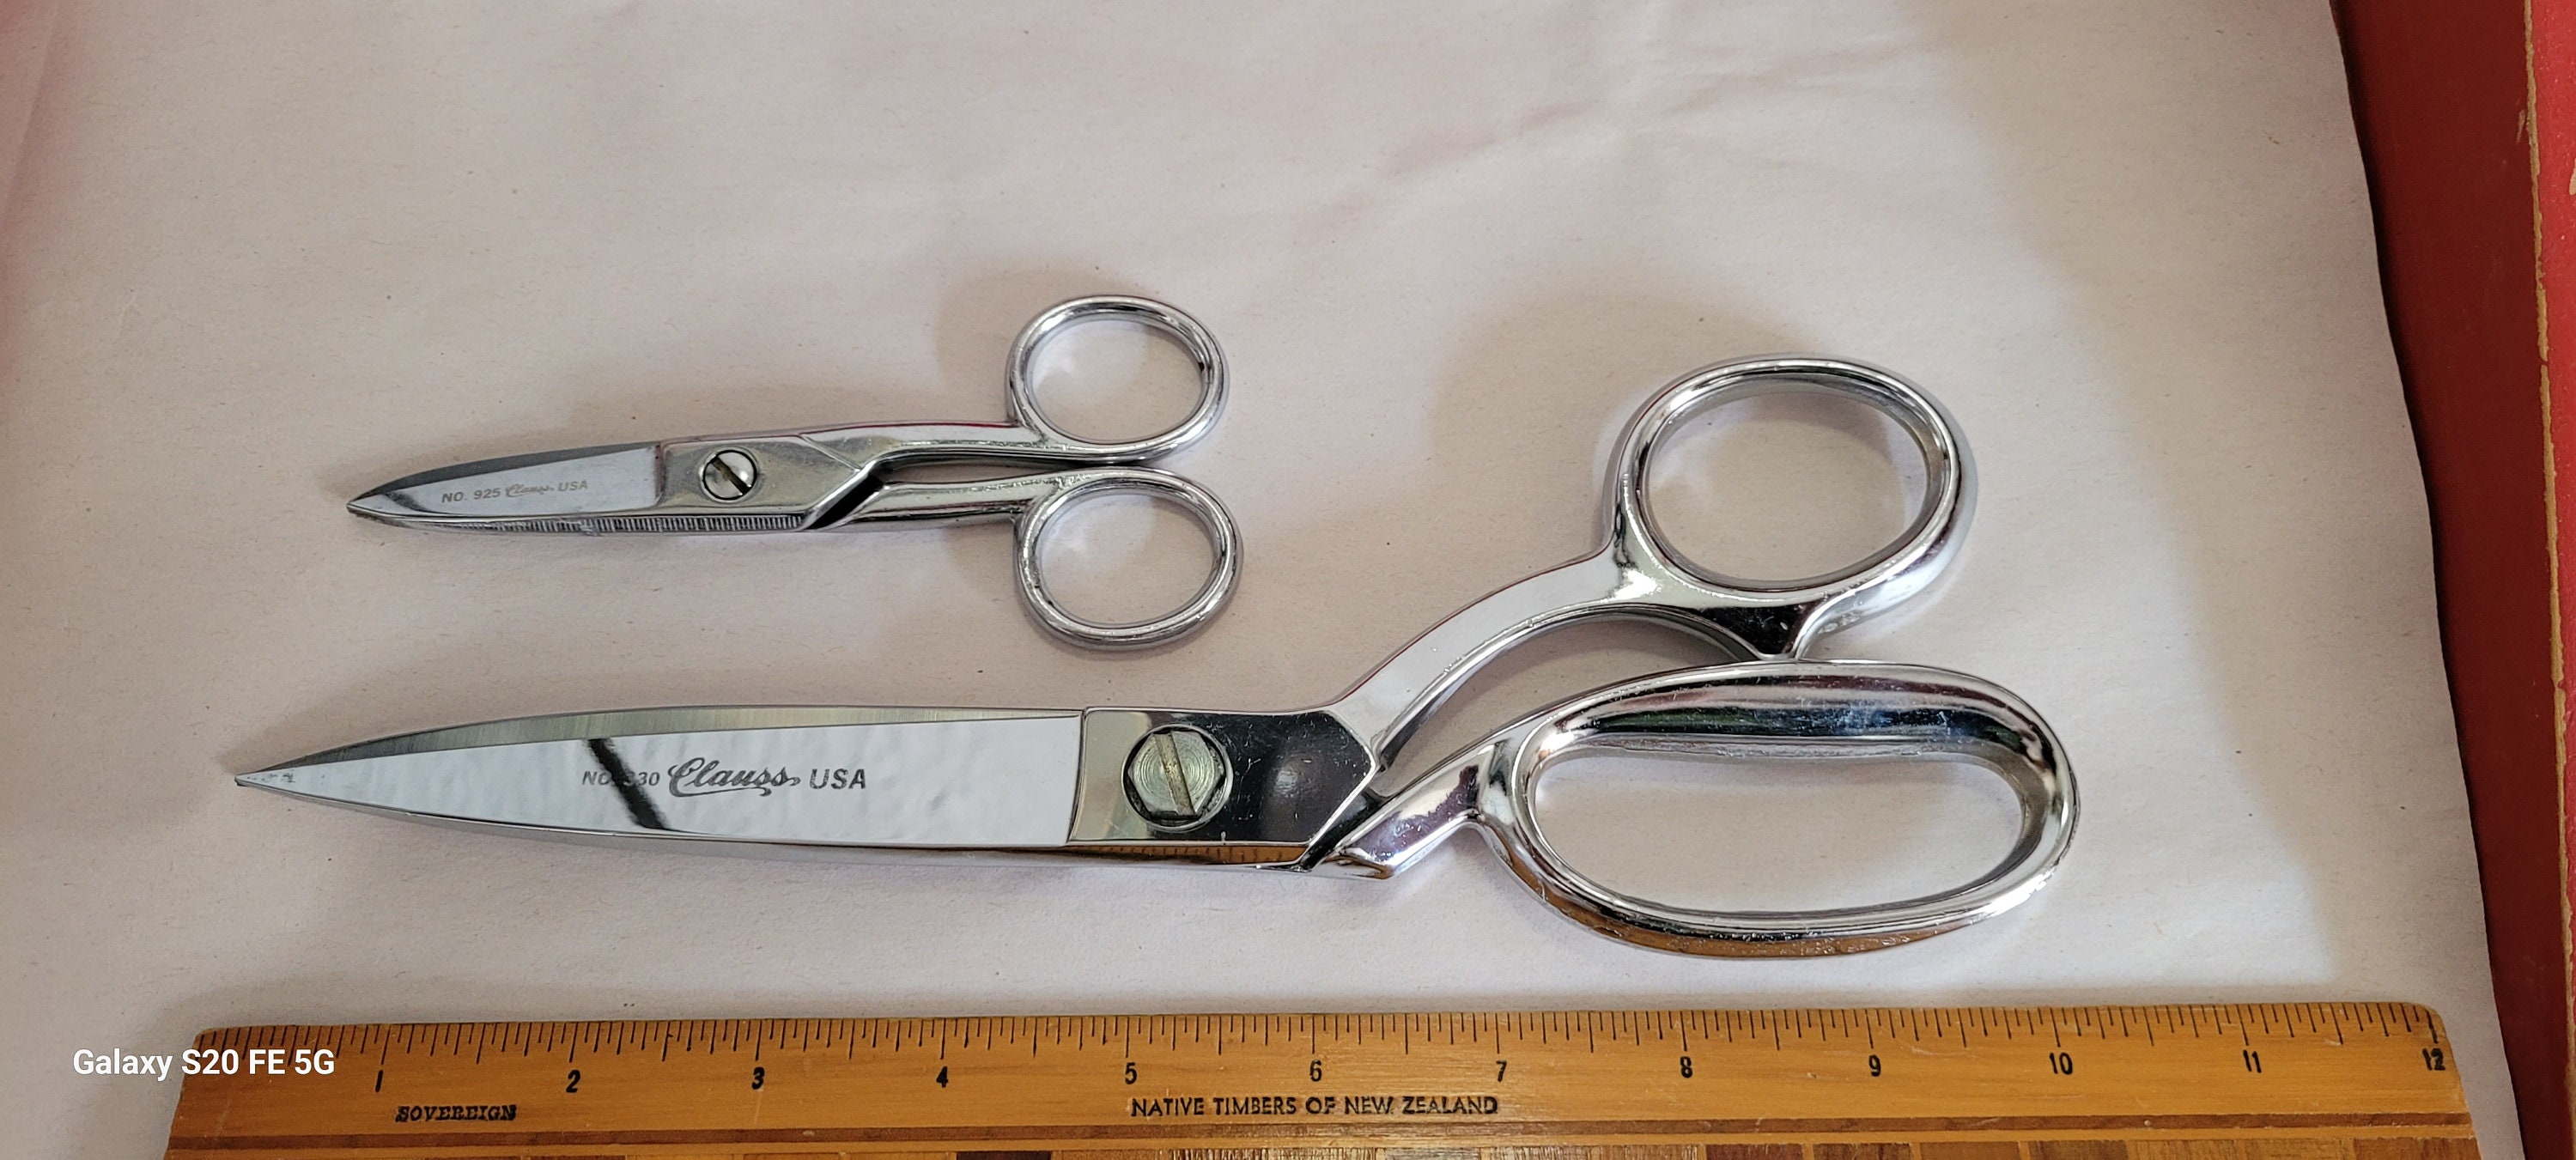 Clauss Small Embroidery Scissors, Metal, Silver, 6.6 x 7 x 0.3 cm